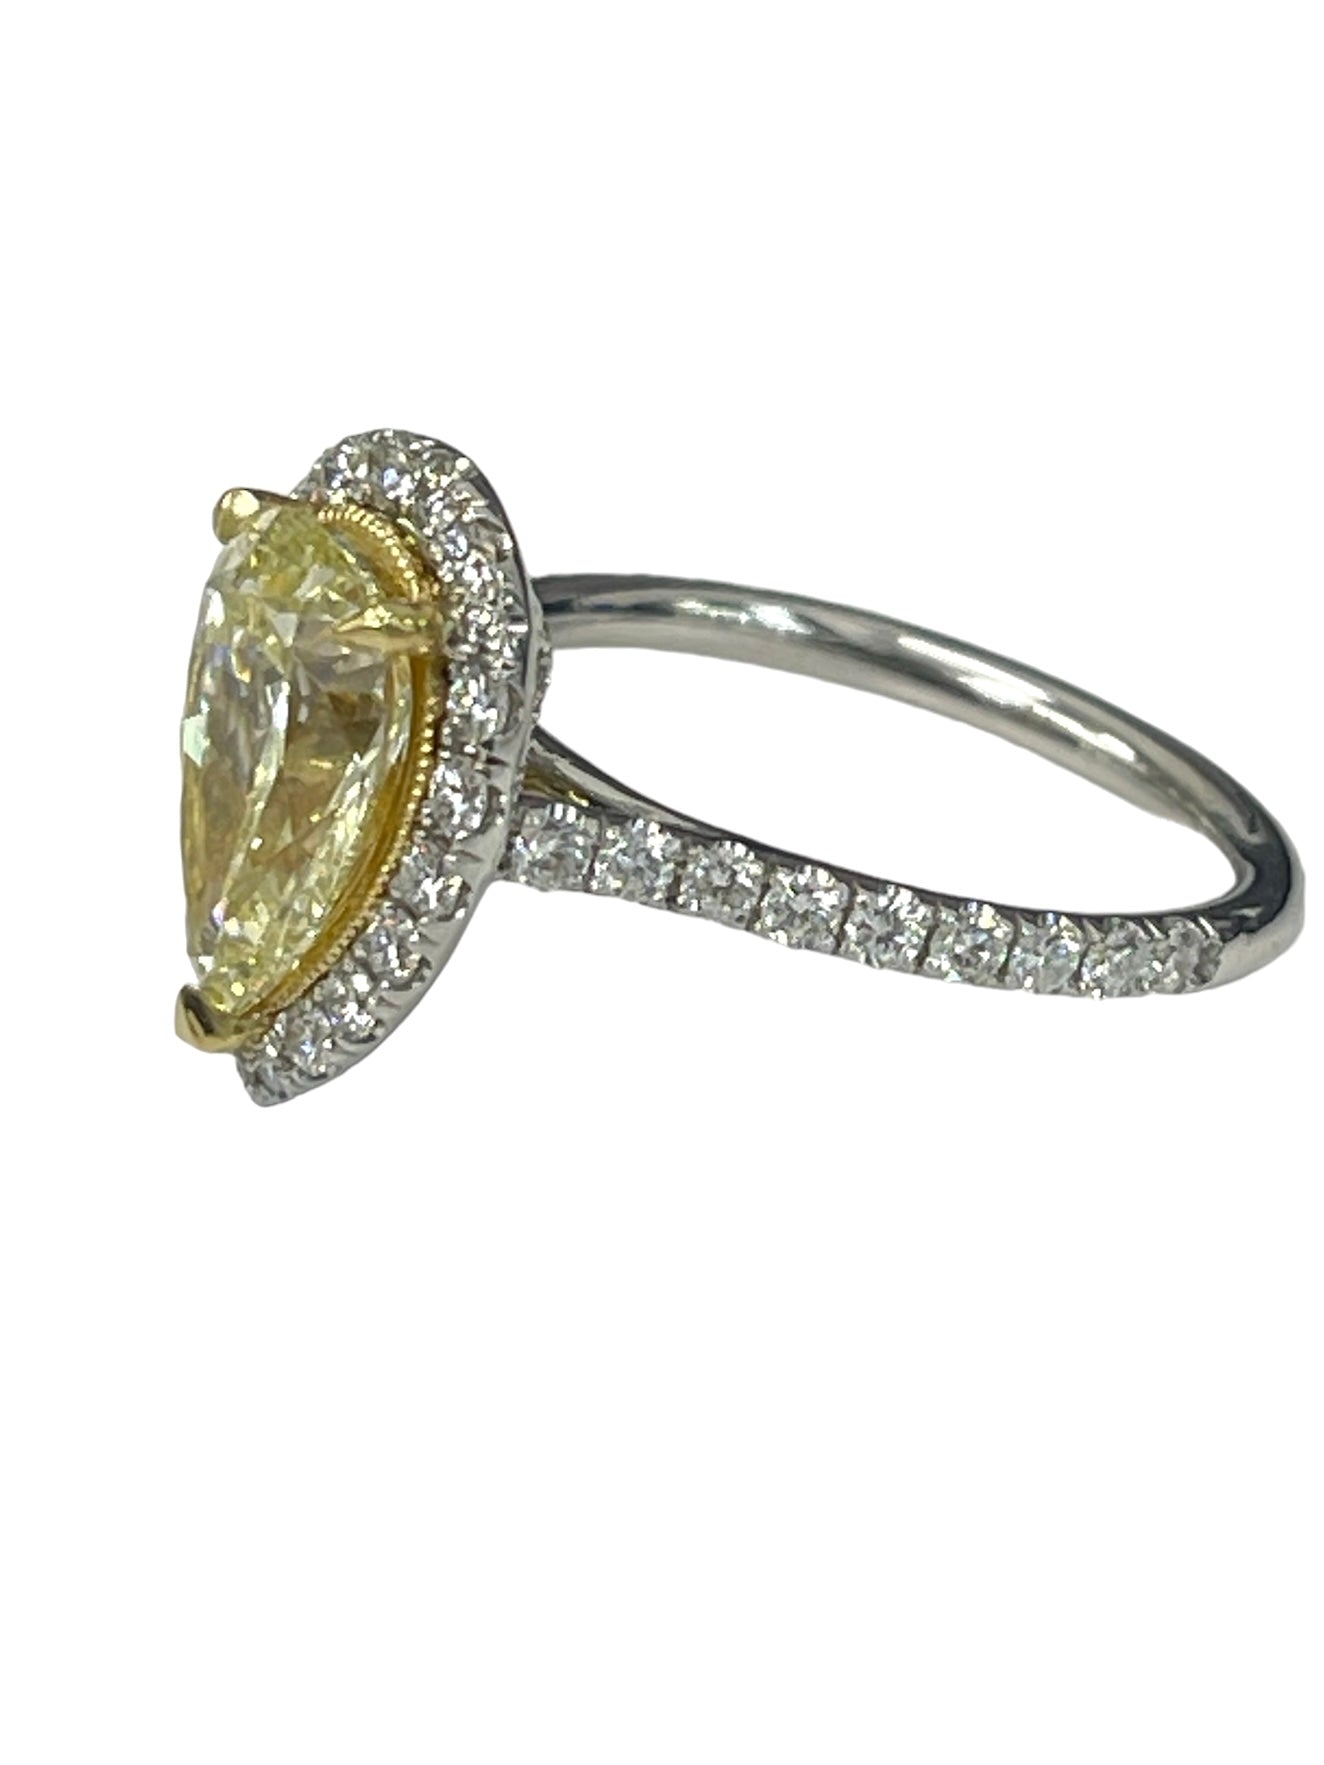 Fancy Yellow Pear Diamond Engagement Ring EGL Certified 18kt White Gold